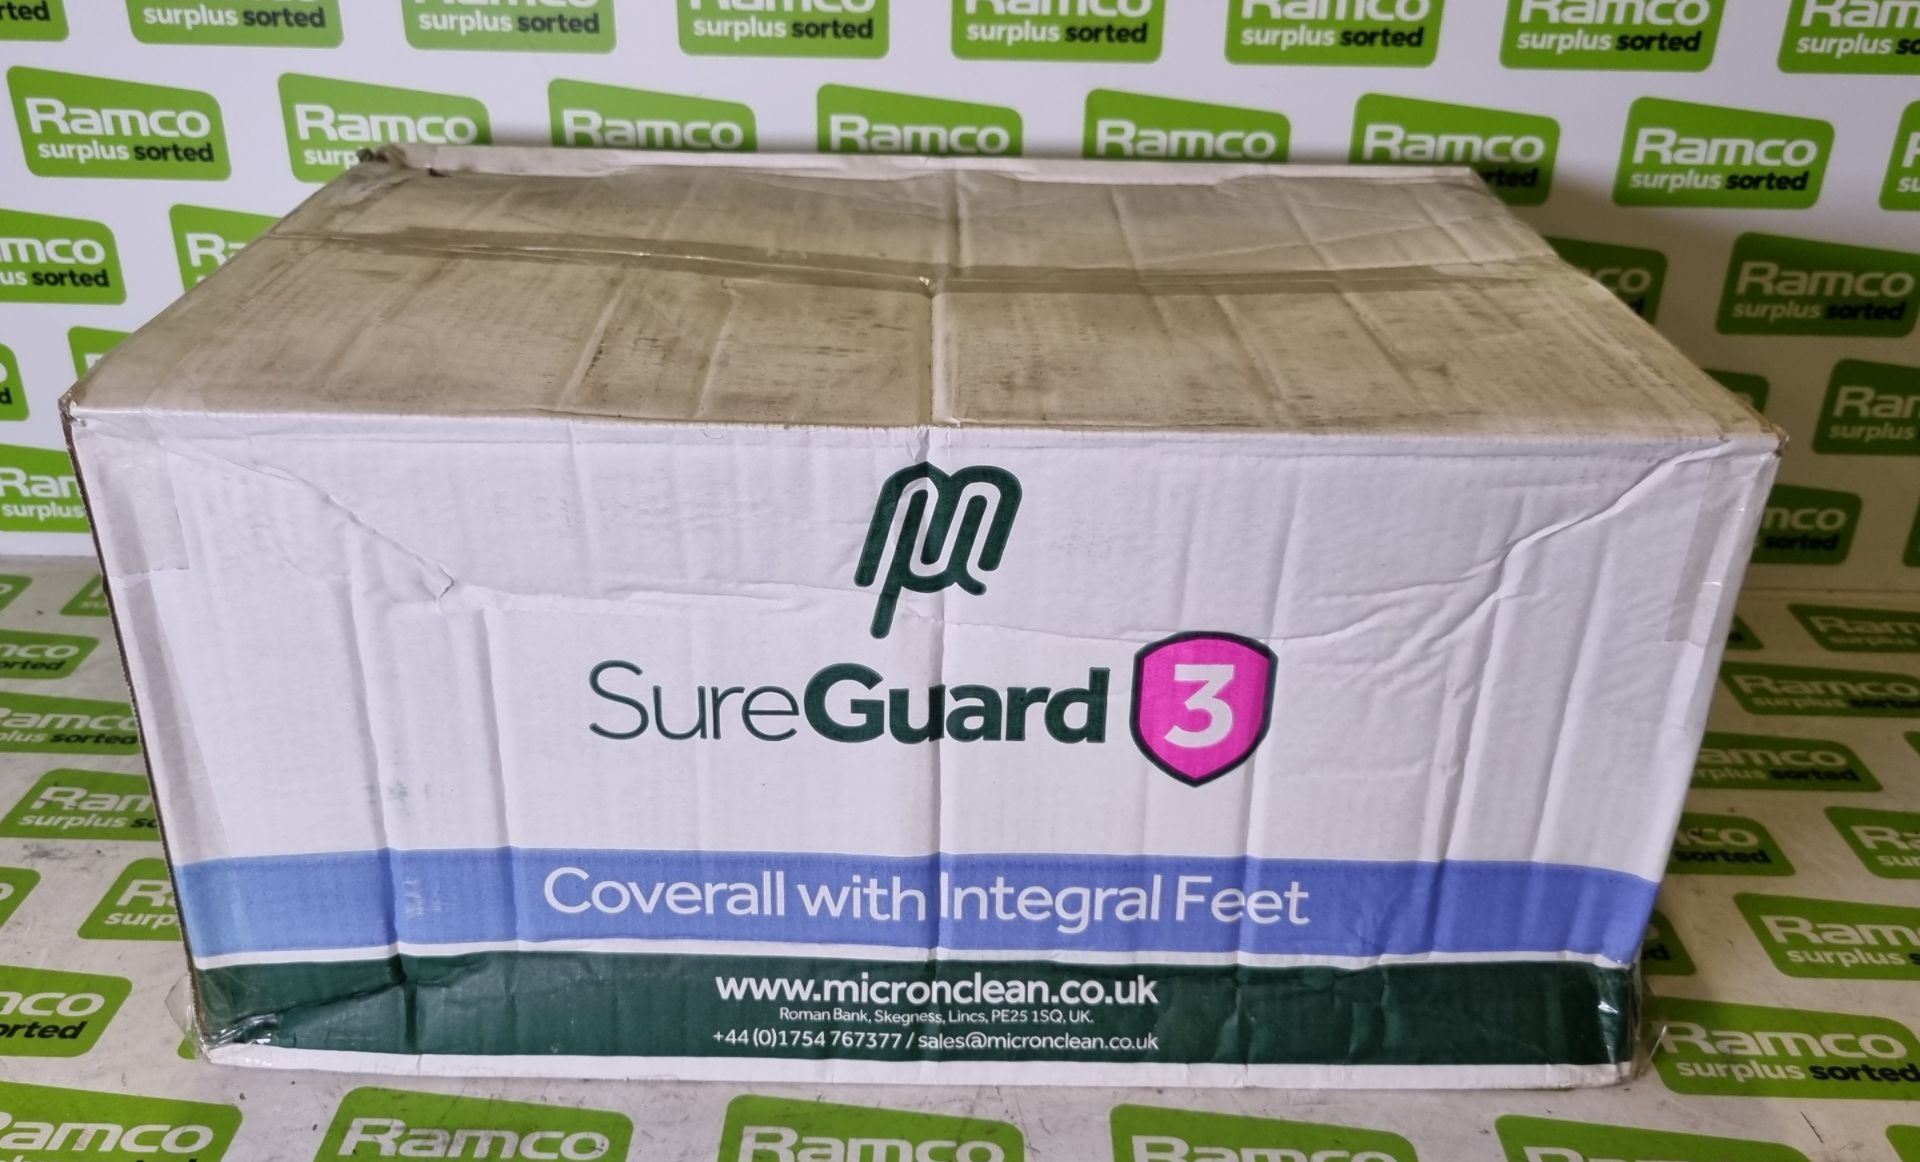 5x boxes of MicroClean SureGuard 3 - size Medium coverall with integral feet - 25 units per box - Bild 2 aus 6